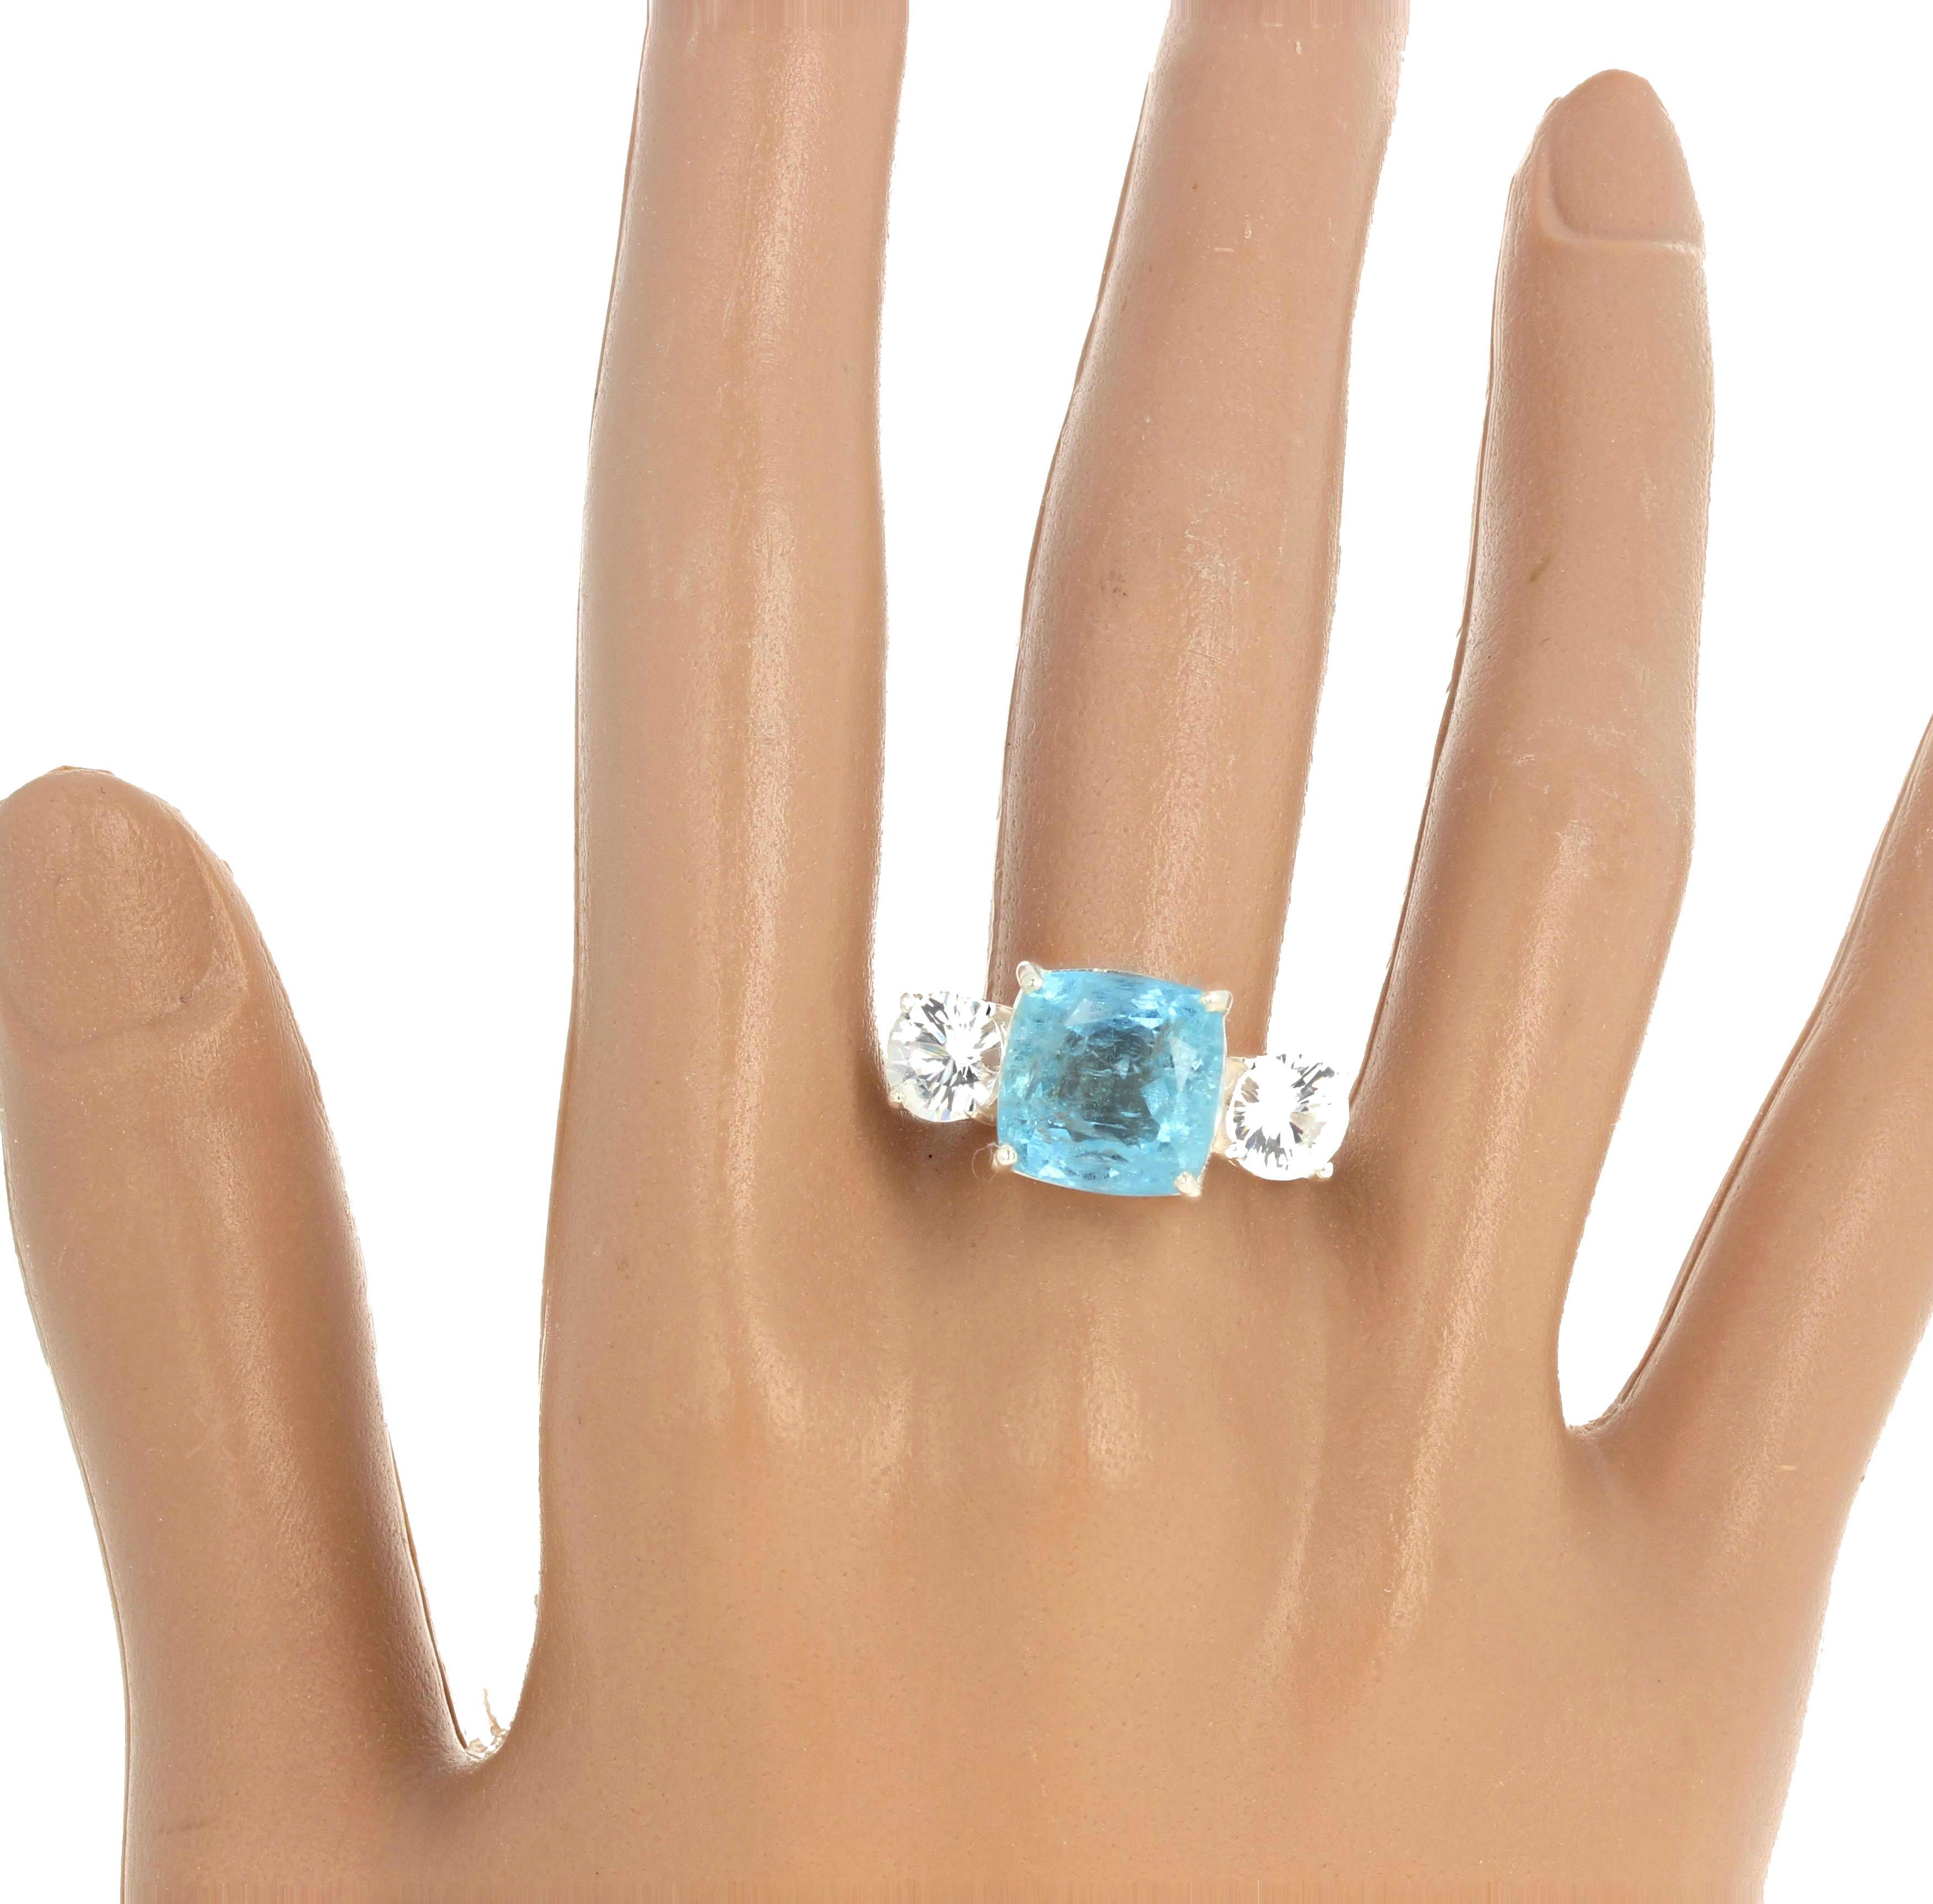 This classic blue 6.76 carat Aquamarine ring is set with 2.62 carats of intense white glittering natural Cambodian Zircons.  Although full of natural inclusions this ring is really beautifully bright and happy.  The ring is sterling silver rhodium